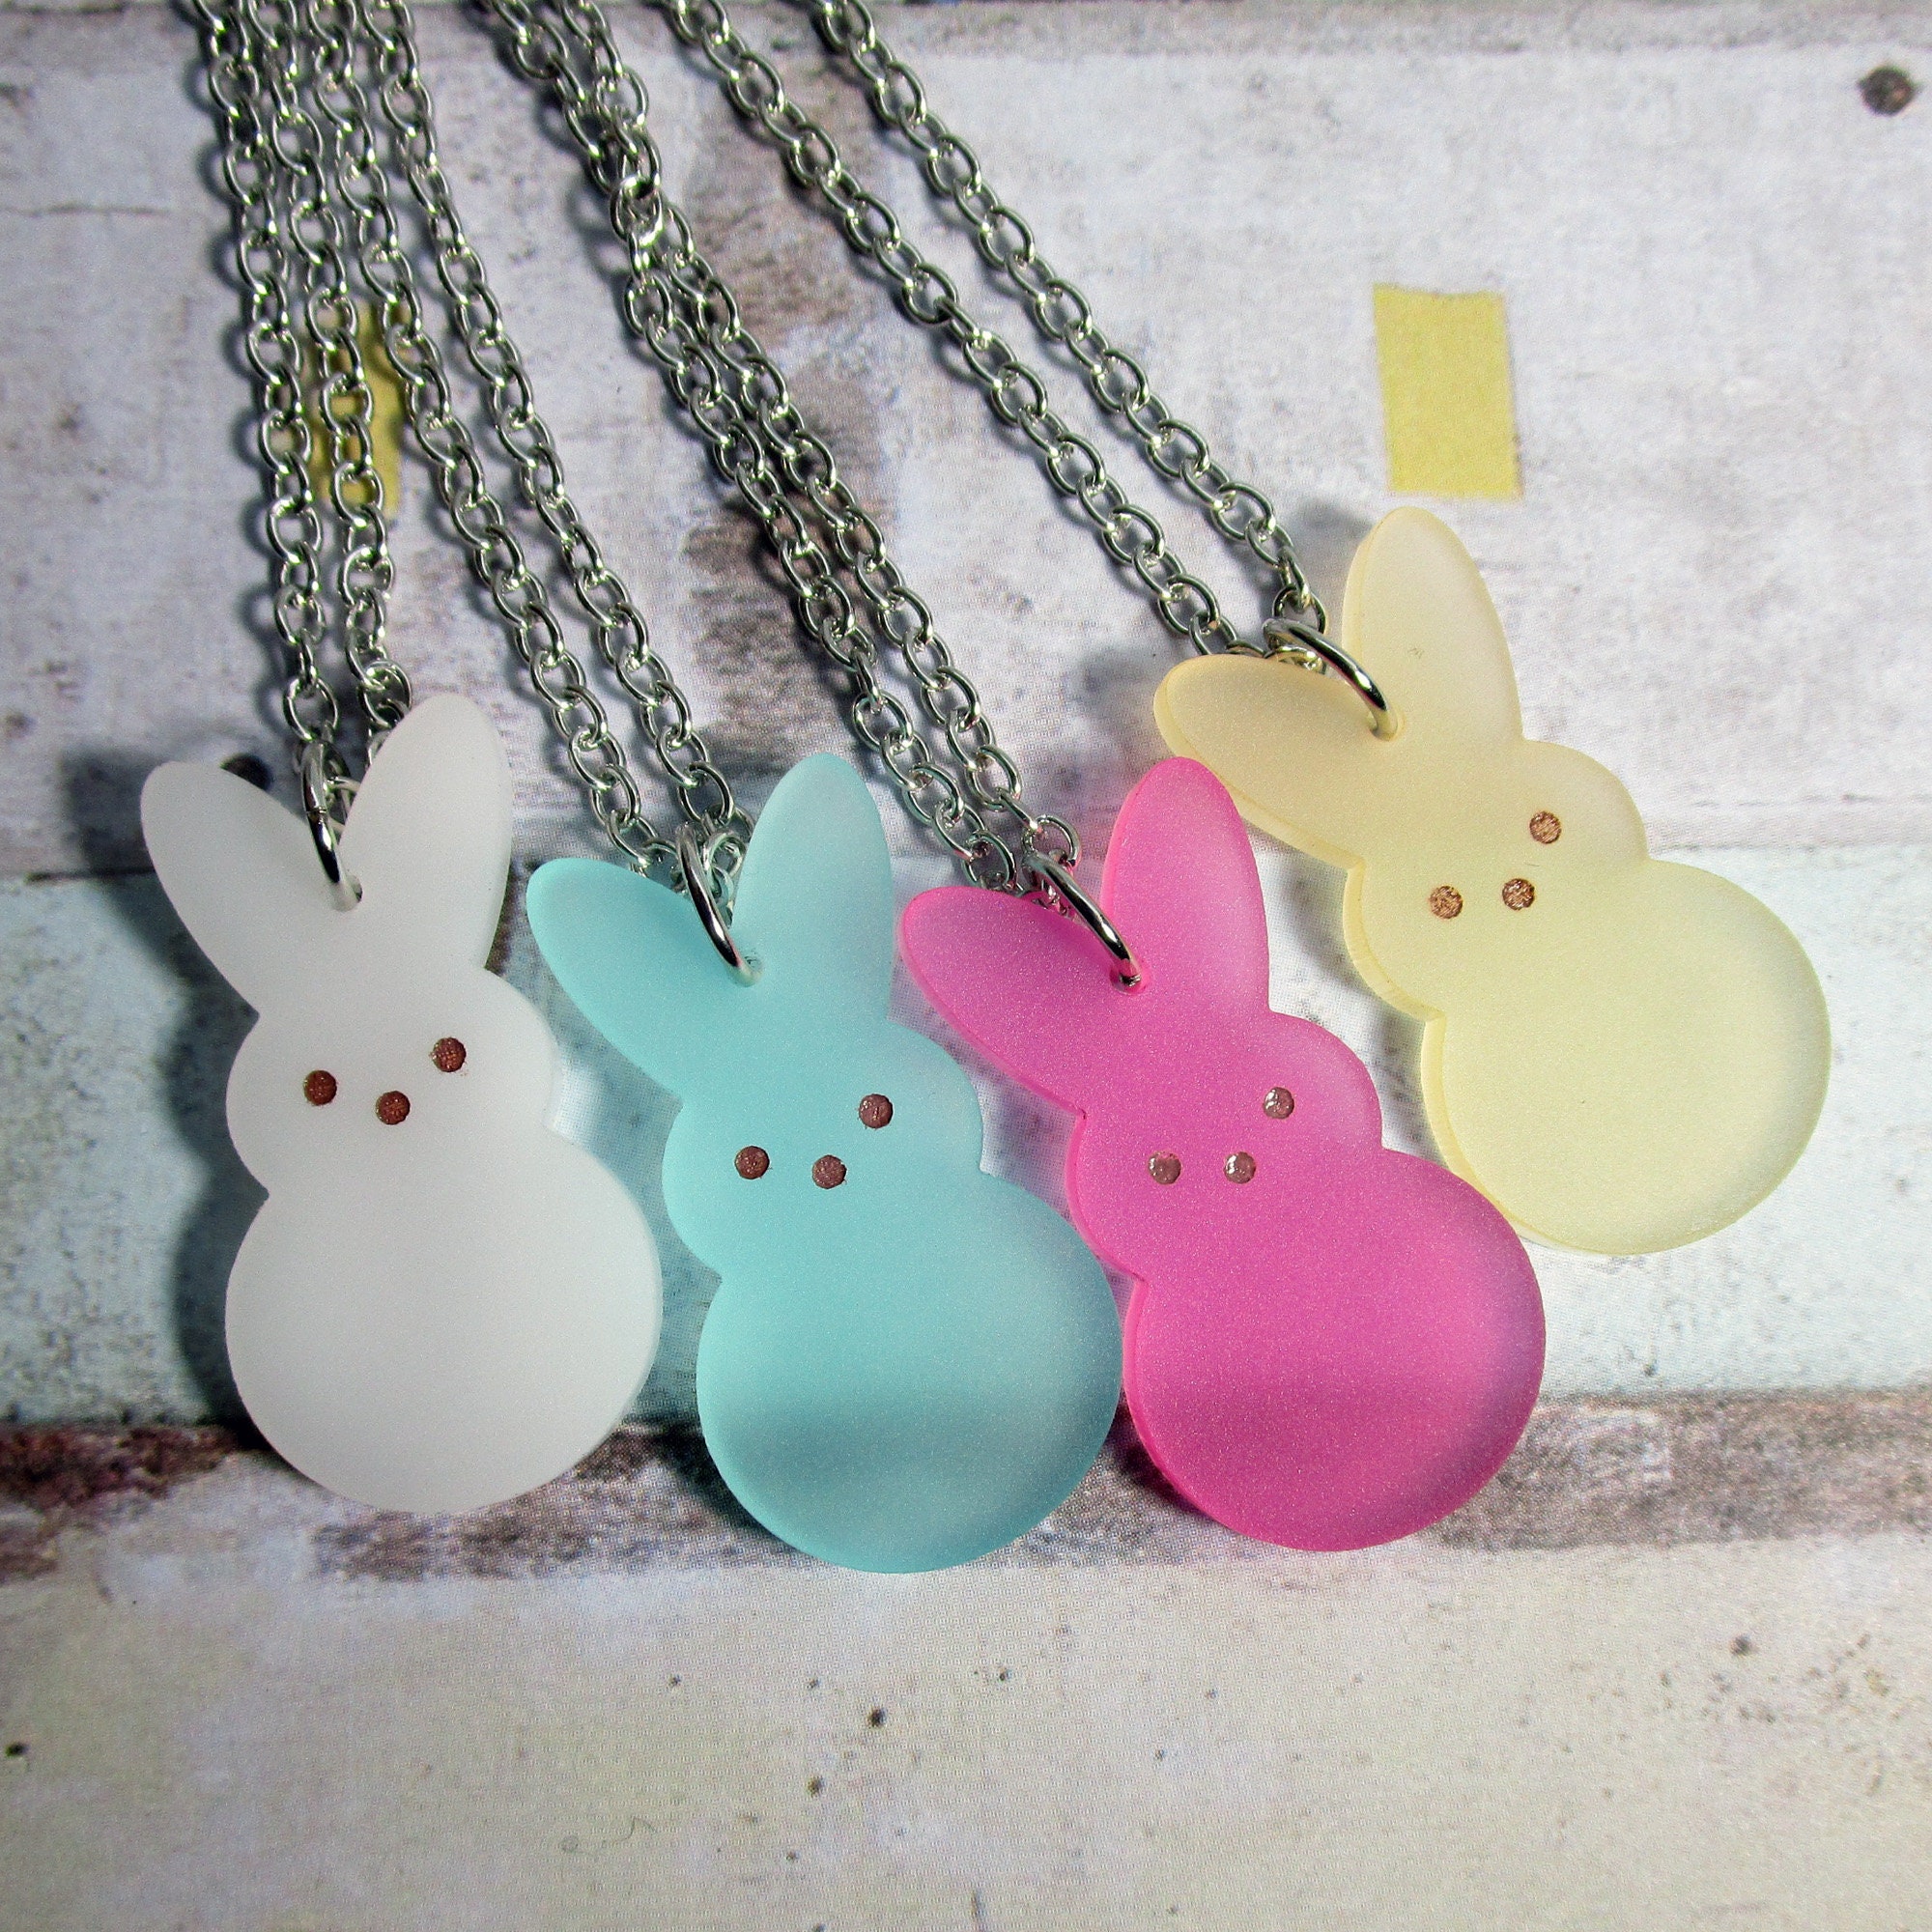 Girls Dainty Beaded Necklace with Small Bunny Peep Center Bead Easter Necklace Pastel Colors Peep Bunny Necklace